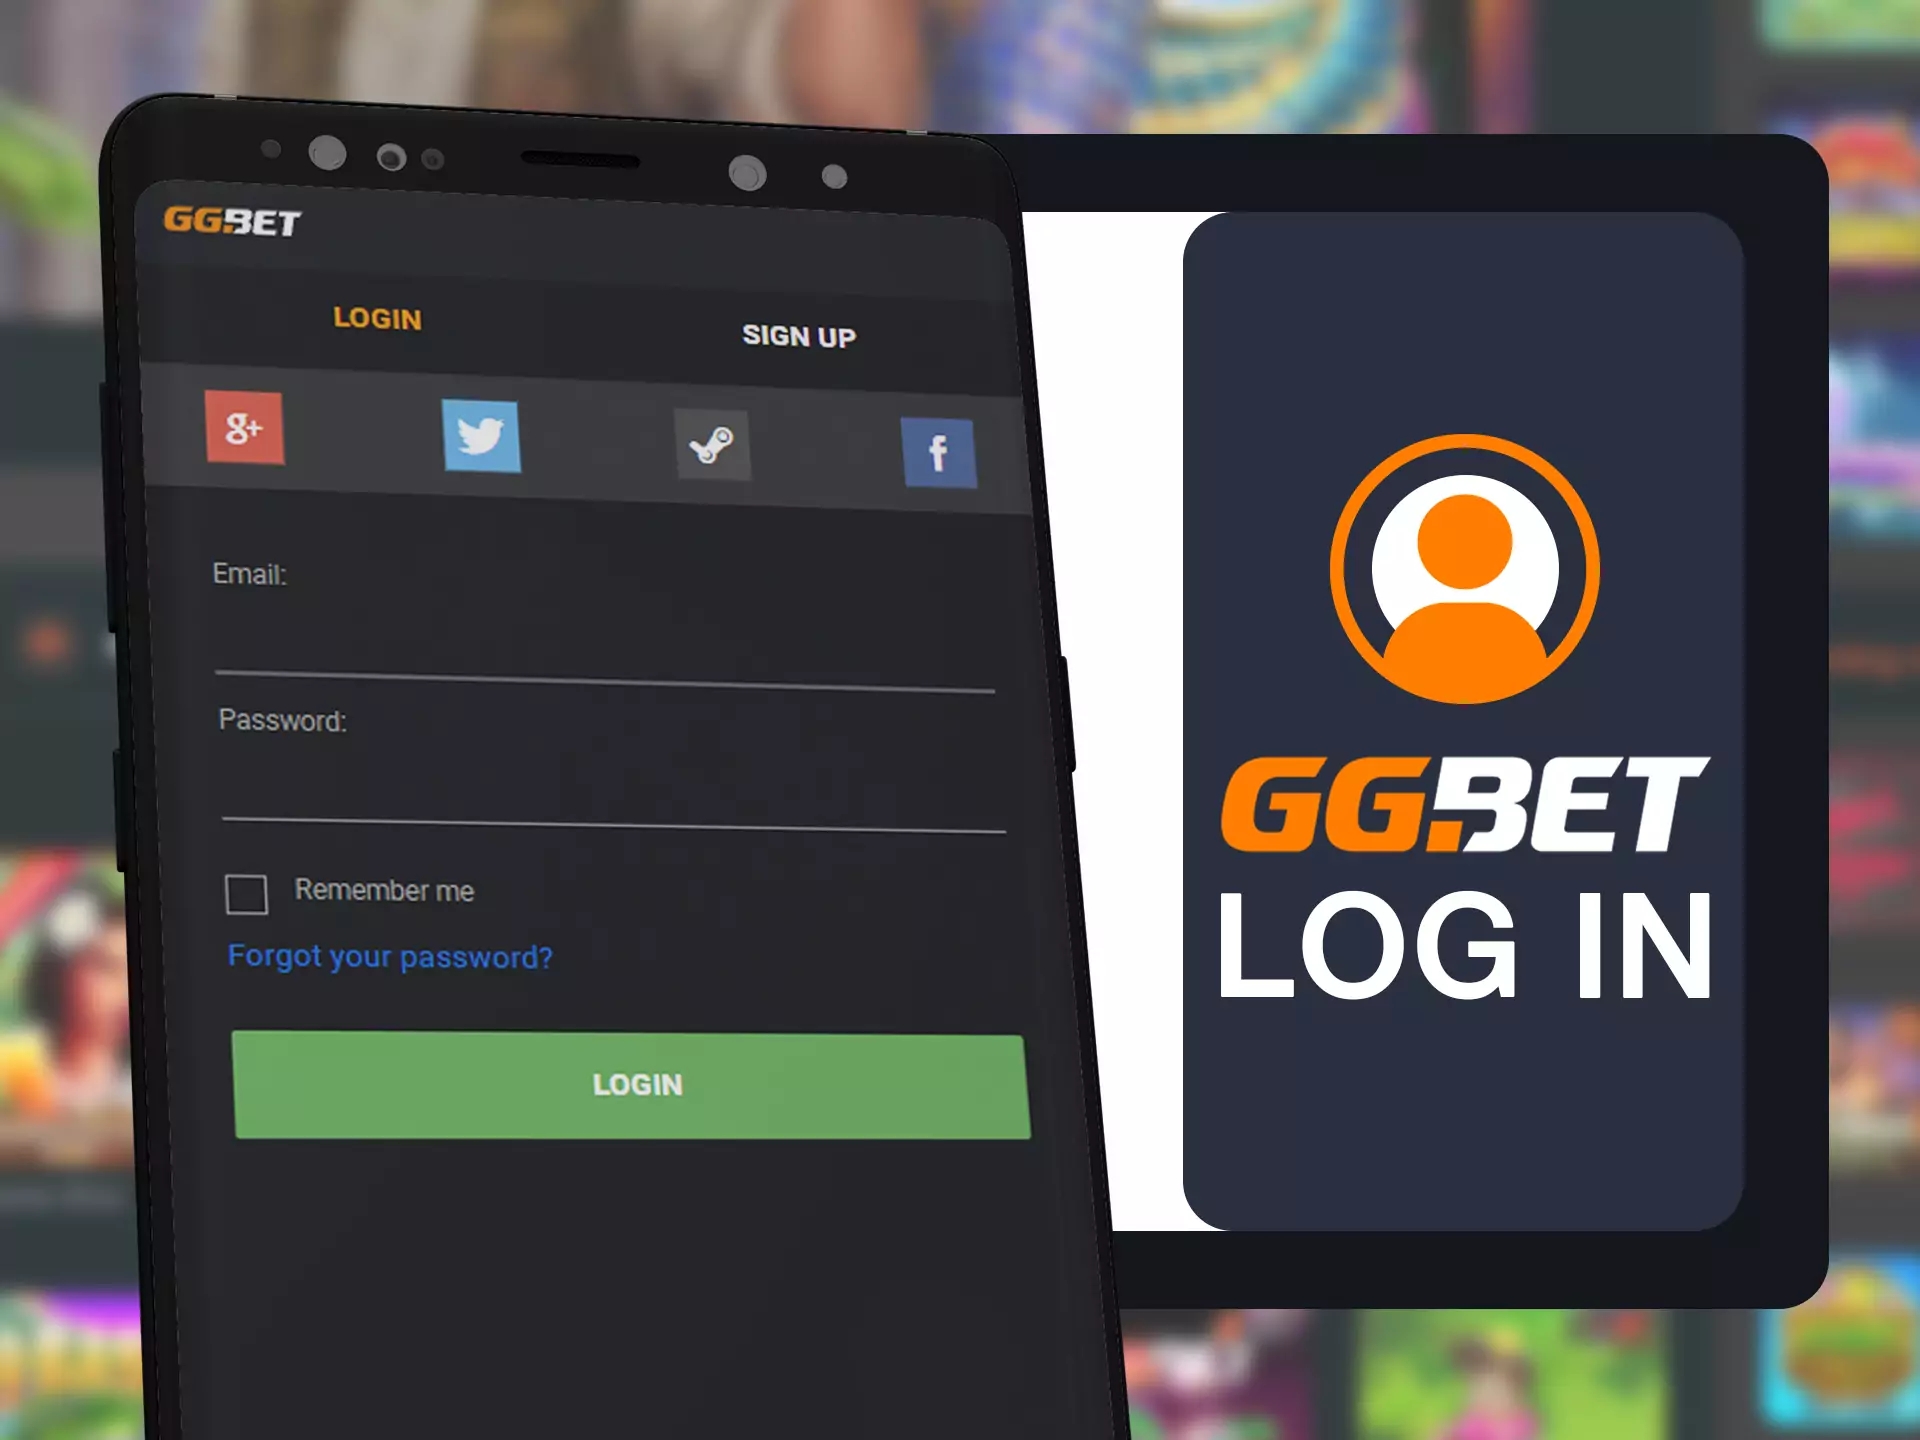 Log in GGBet app for start betting and playing in casino.